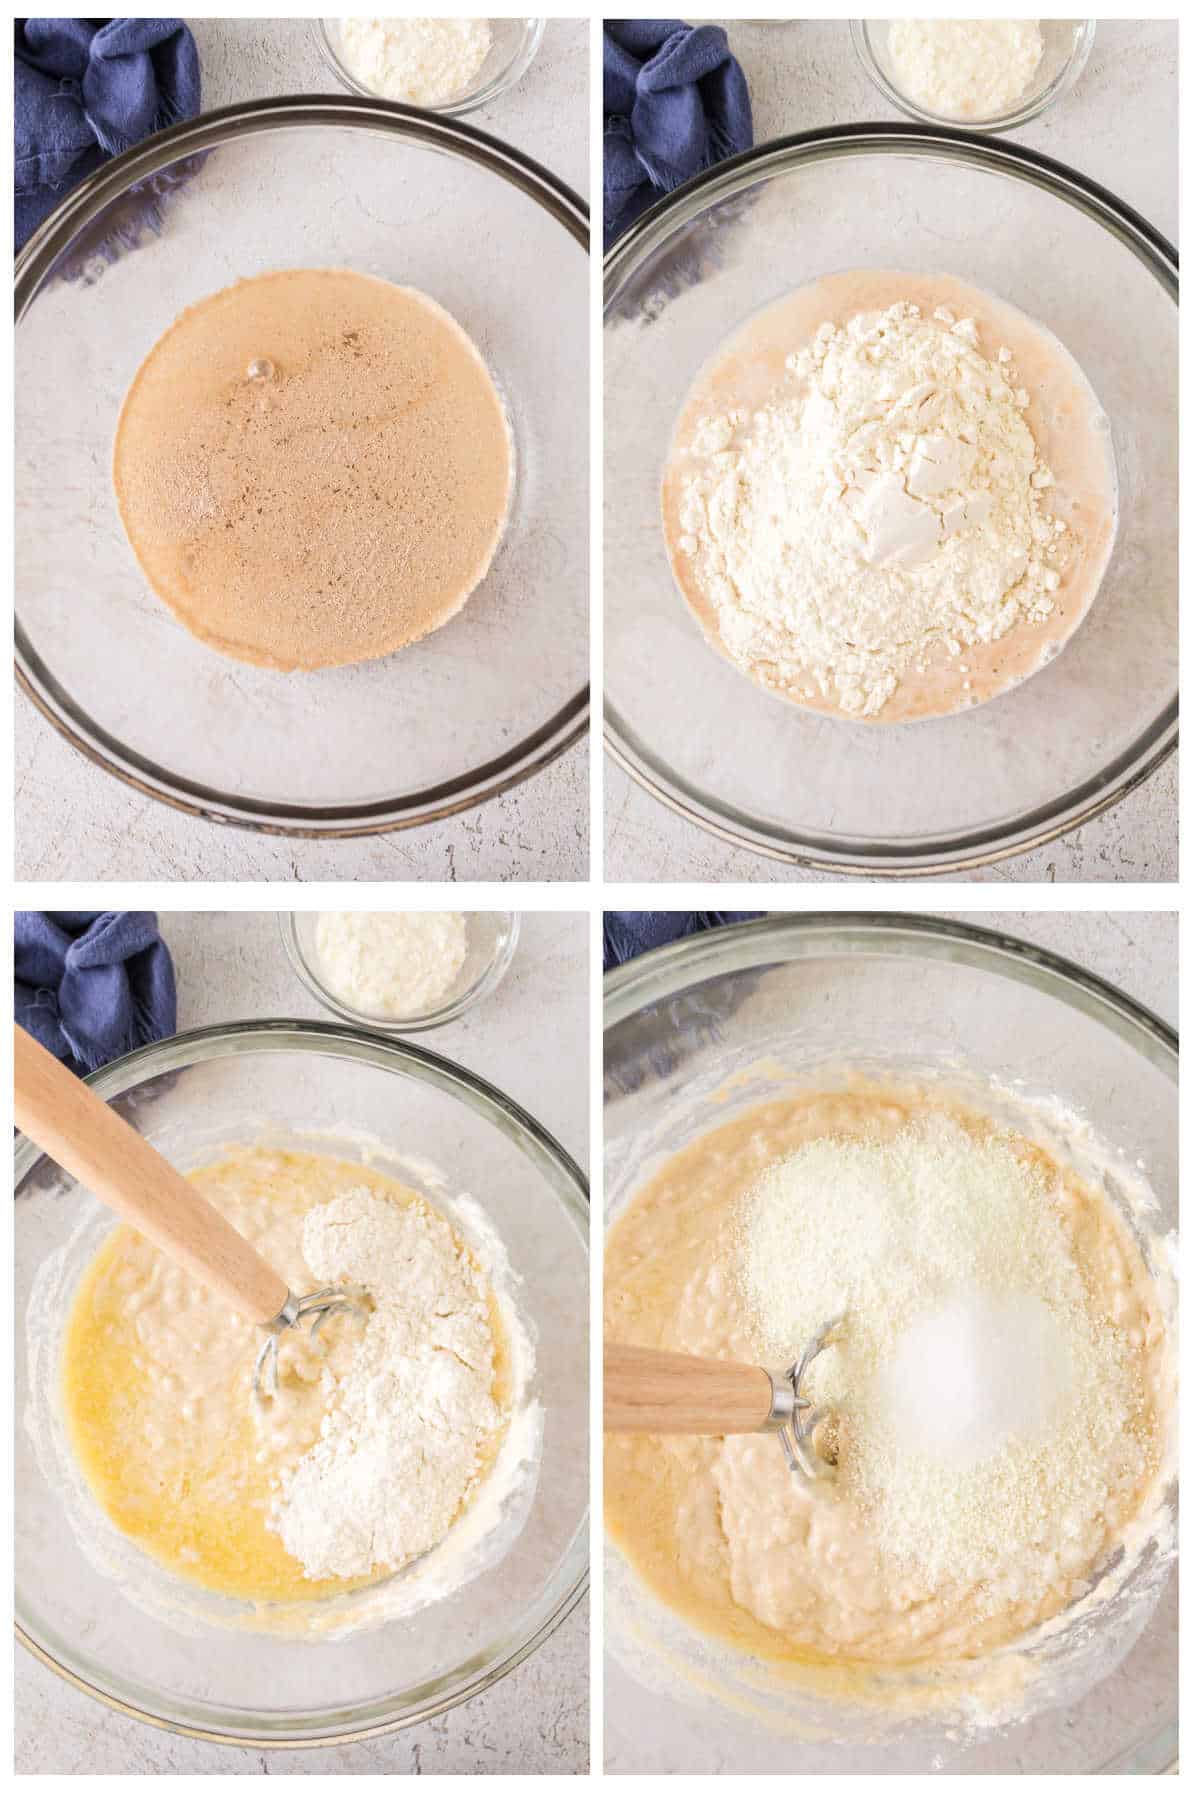 Step by step images showing how to mix the dough for homemade Pullman loaf bread.